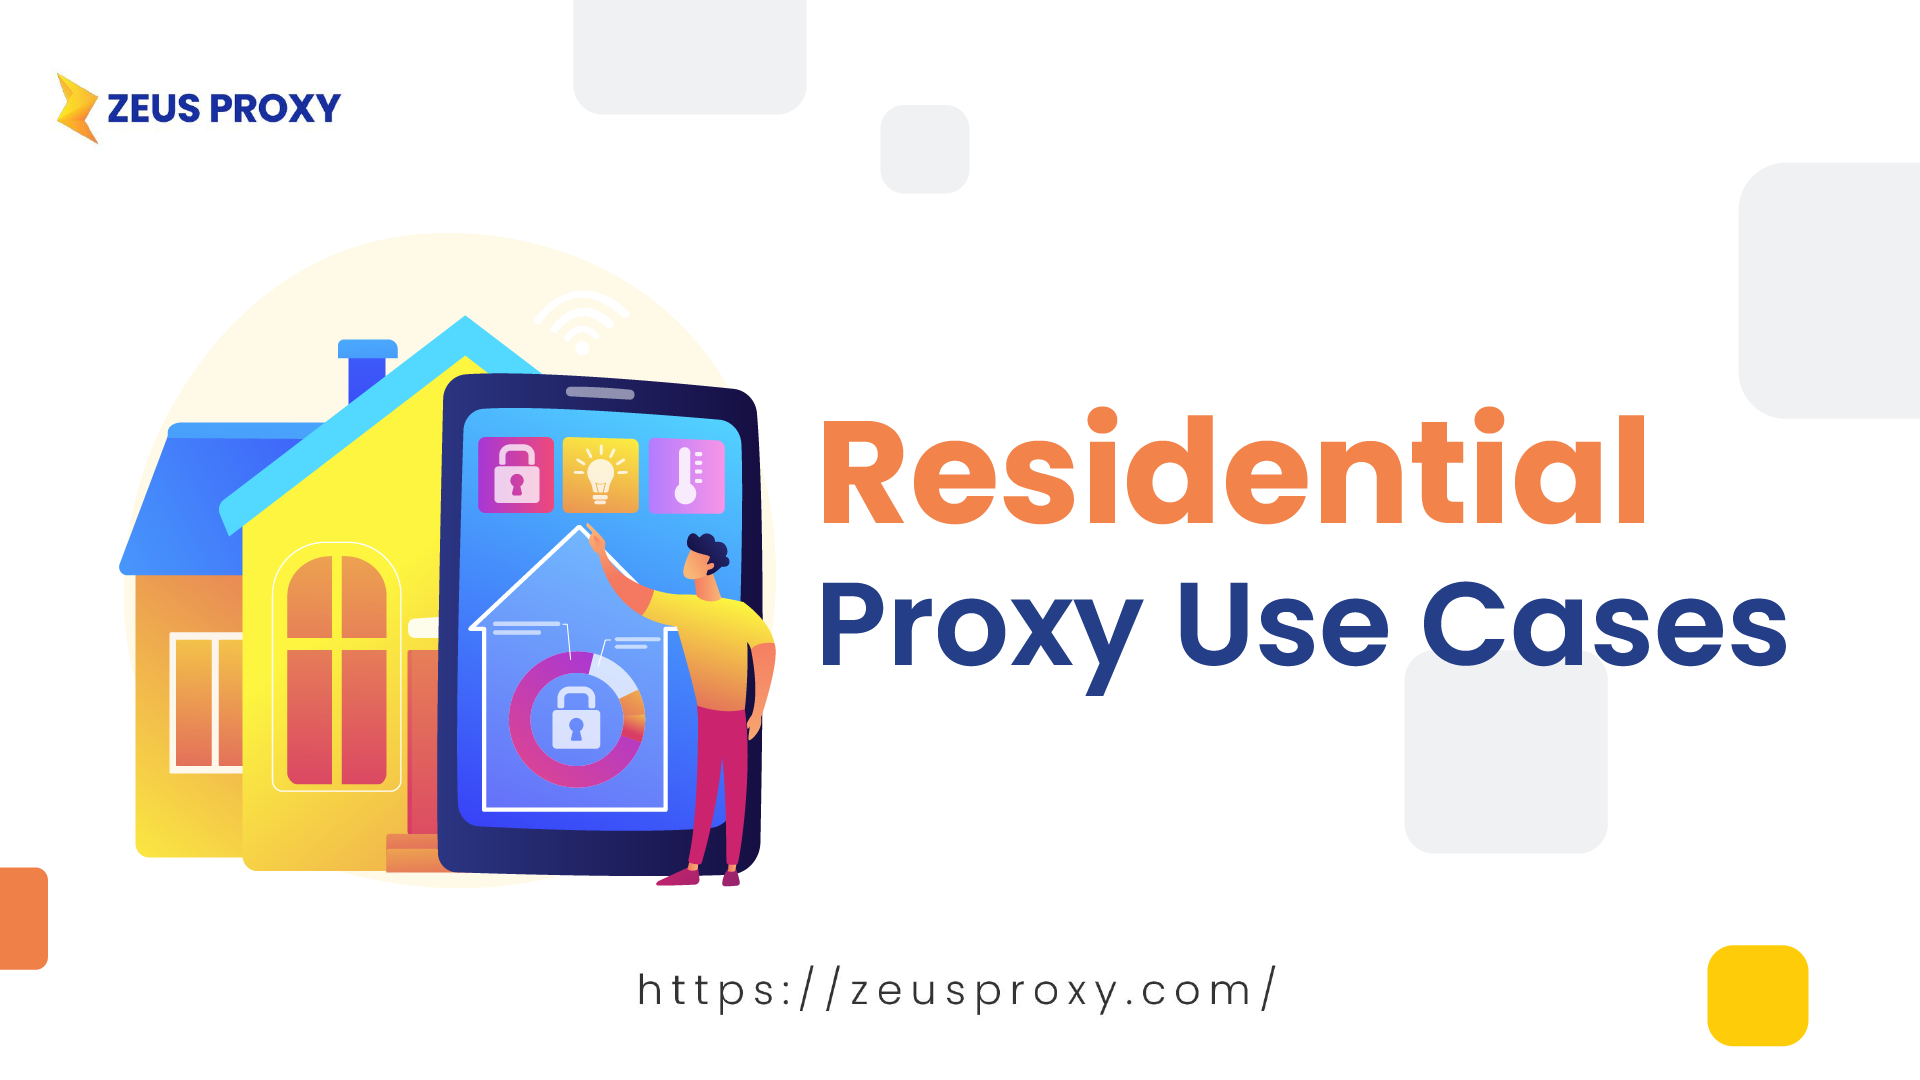 Top 7 Residential Proxy Use Cases - How to make money with Residential Proxy?